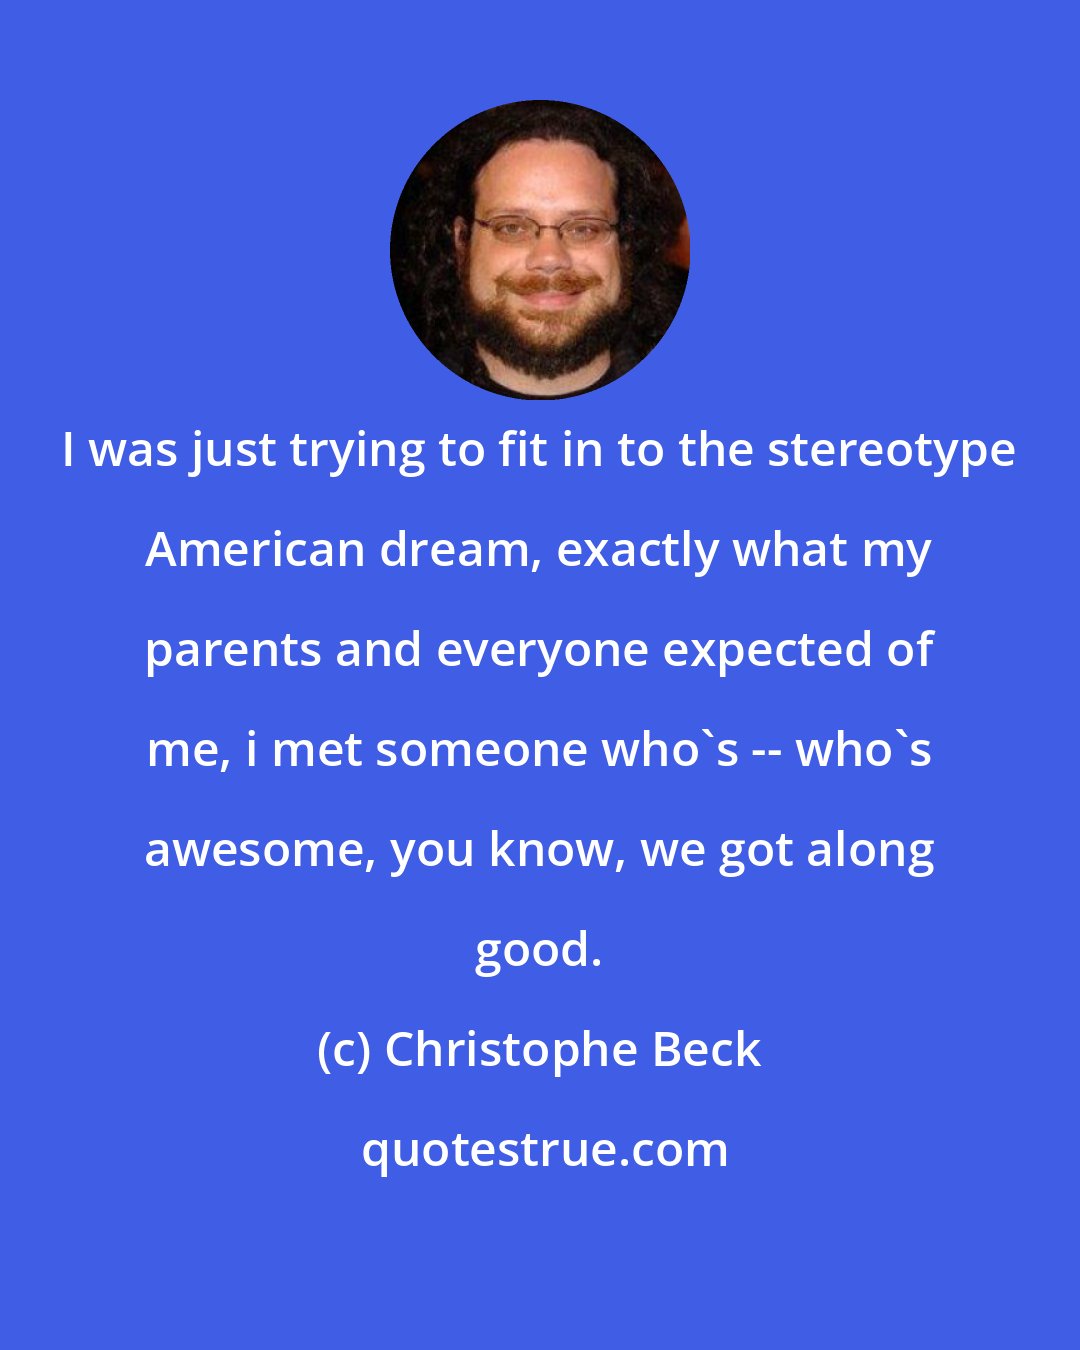 Christophe Beck: I was just trying to fit in to the stereotype American dream, exactly what my parents and everyone expected of me, i met someone who's -- who's awesome, you know, we got along good.